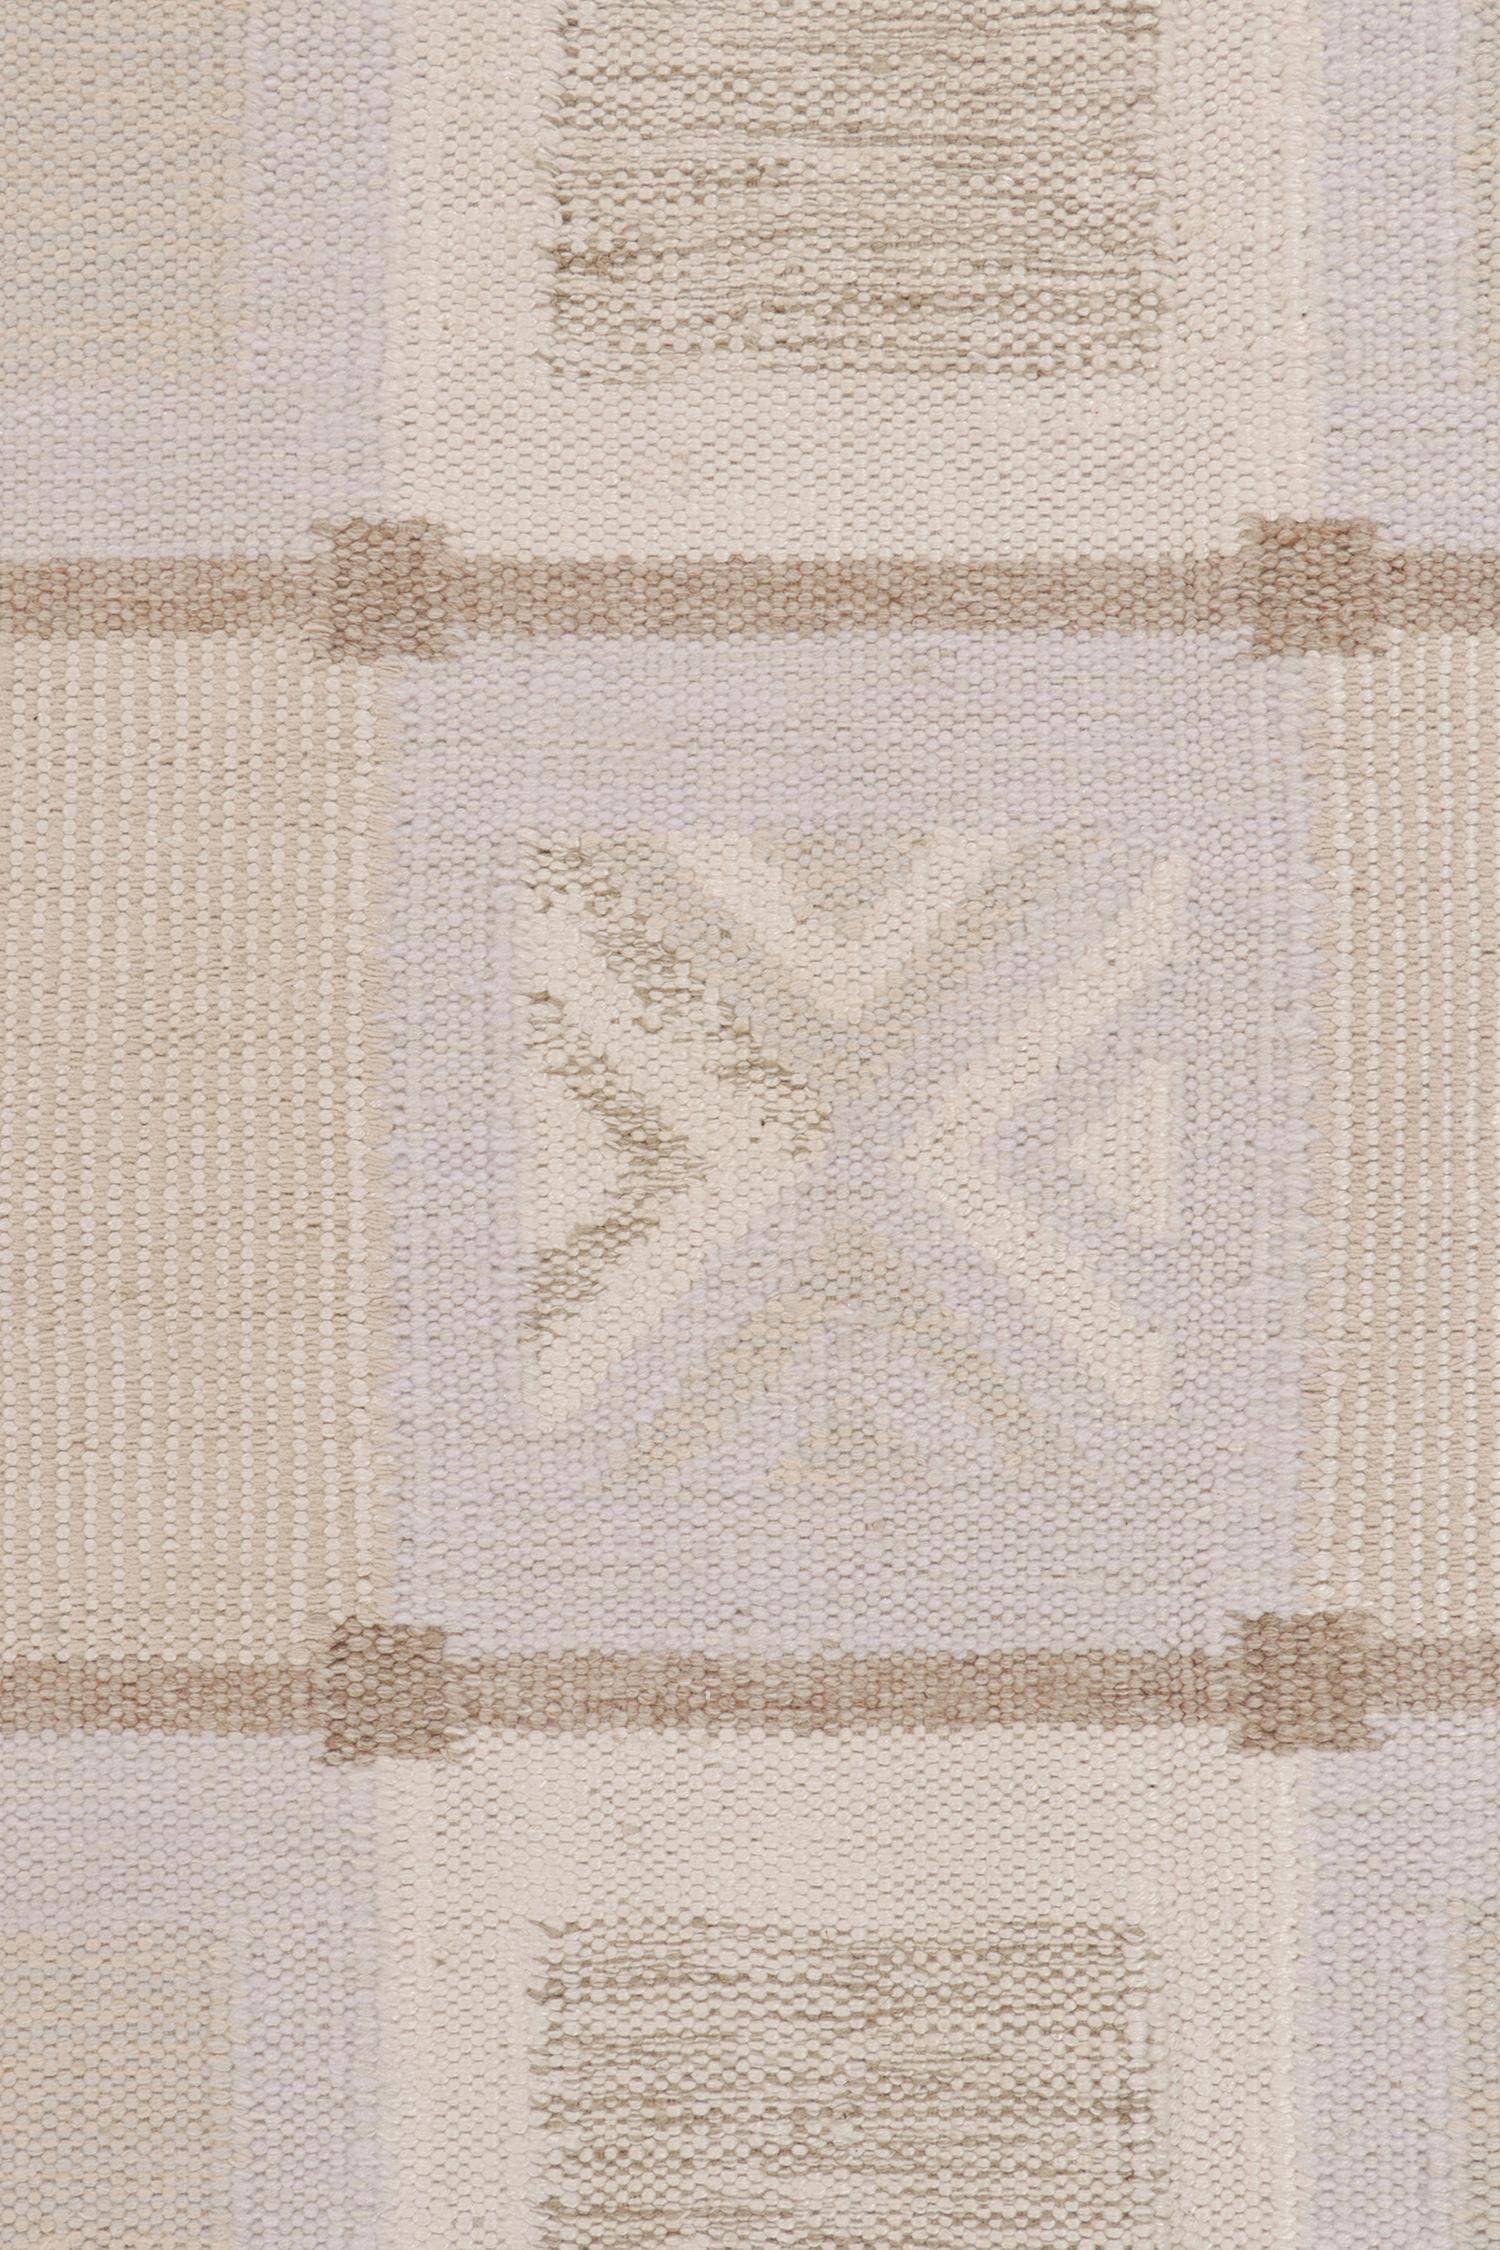 Rug & Kilim's Scandinavian Style Kilim in White, Beige-Brown Geometric Pattern In New Condition For Sale In Long Island City, NY